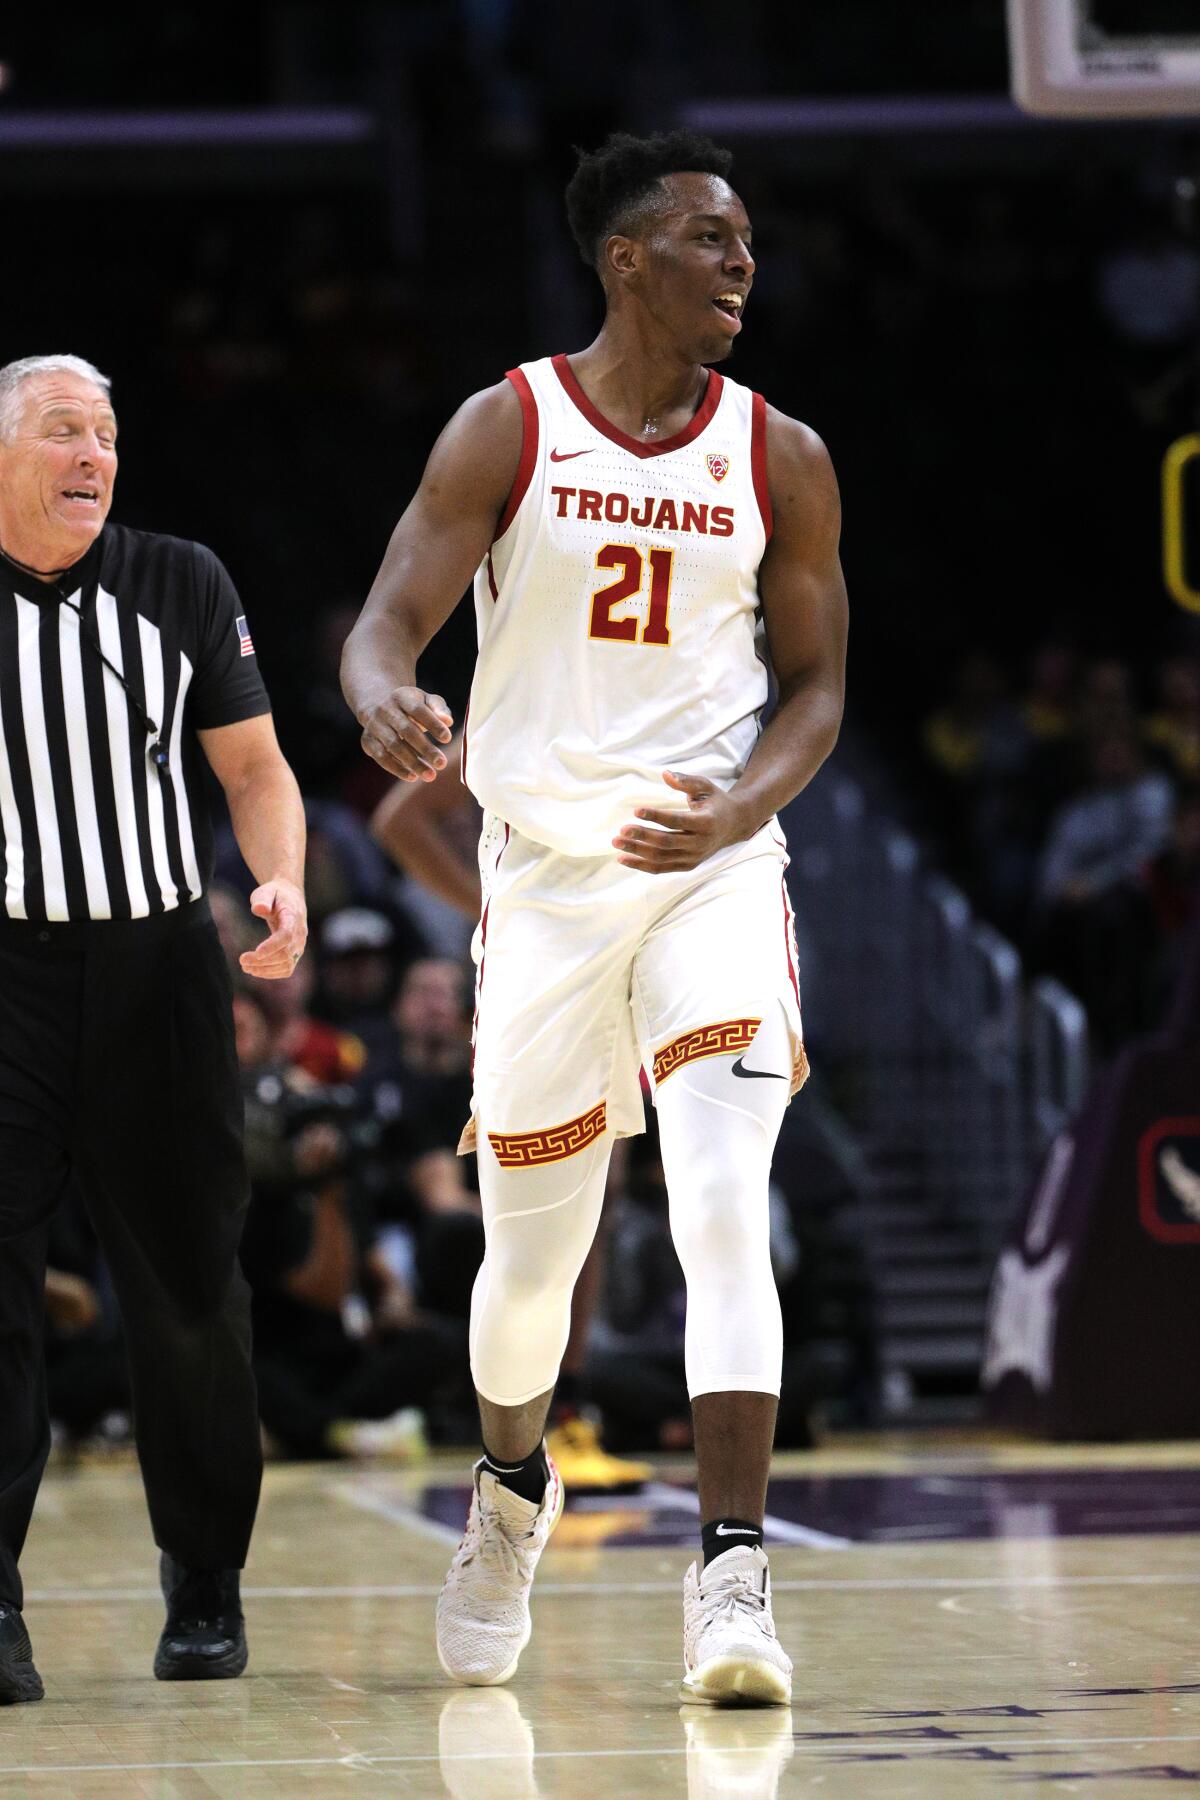 USC forward Onyeka Okongwu reacts against LSU in the 2019 Air Force Reserve Basketball Hall of Fame Classic at Staples Center on Dec. 21, 2019.